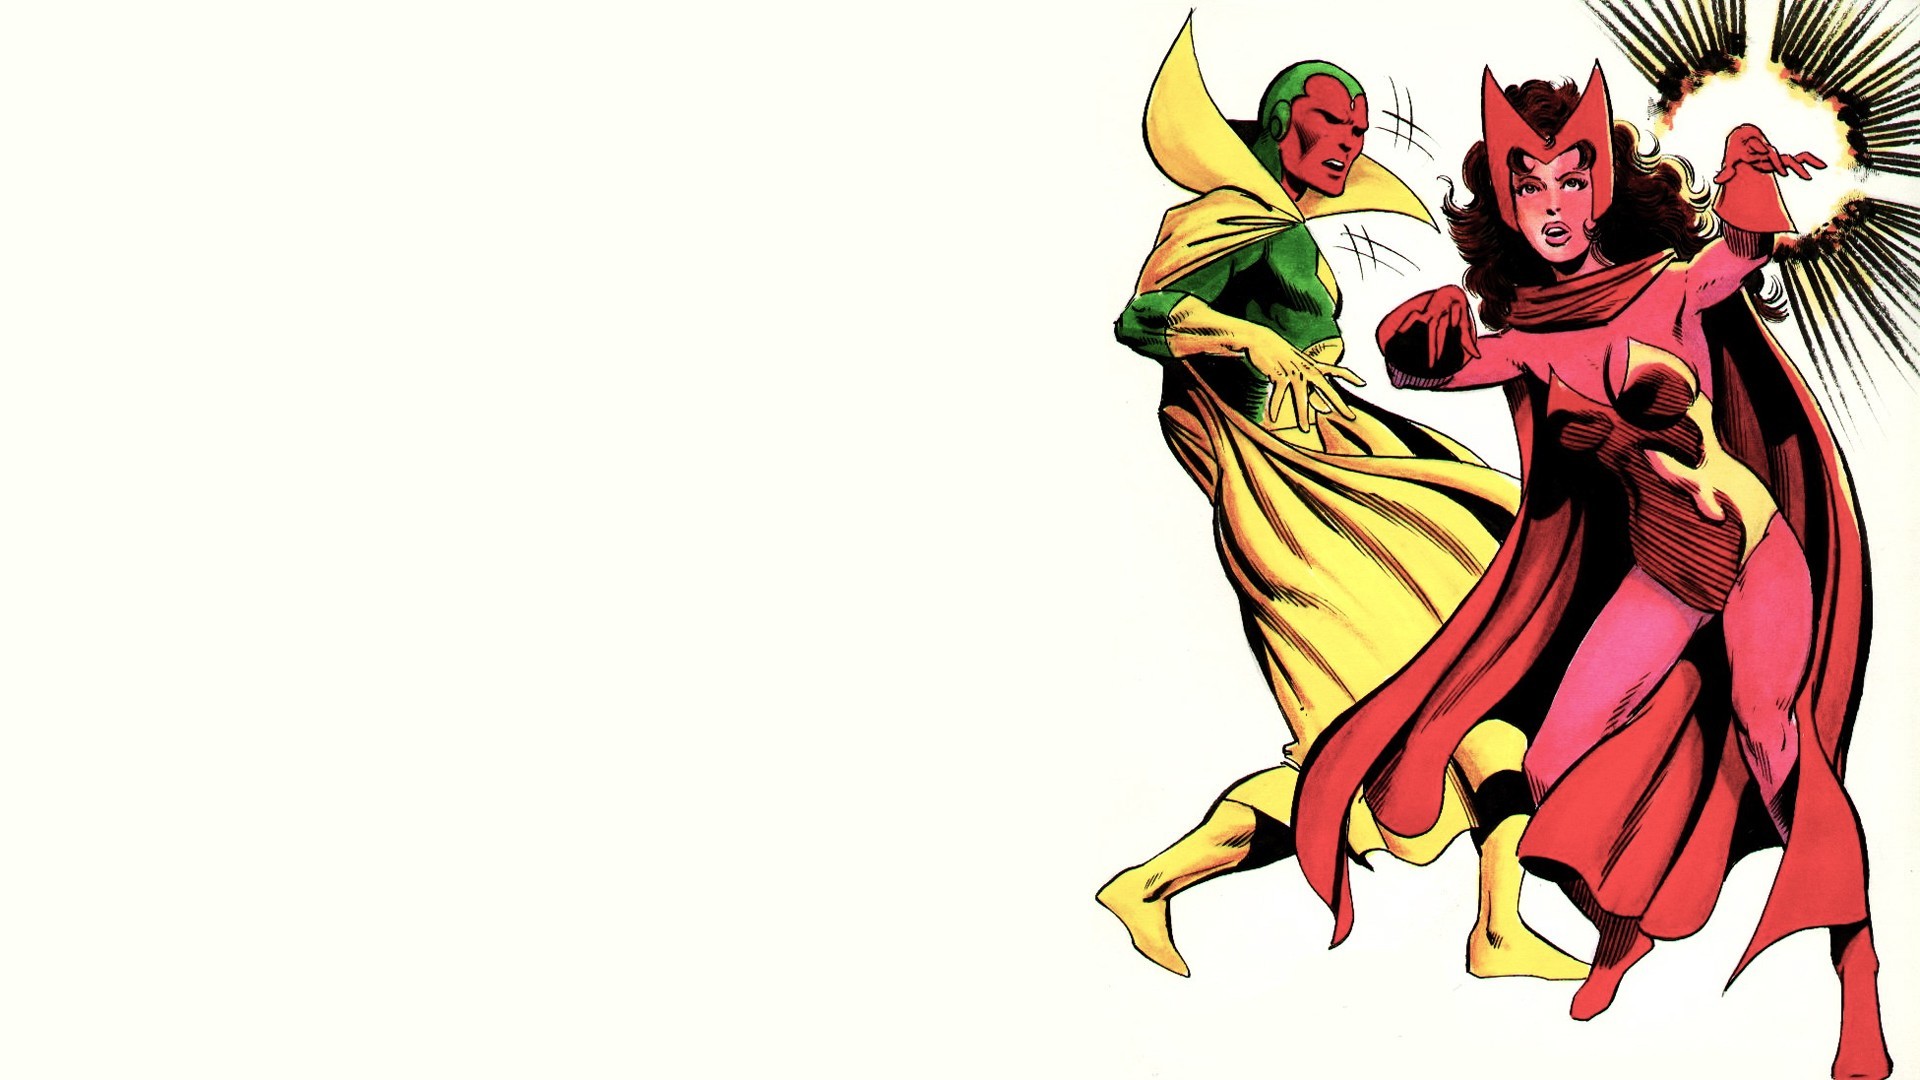 1920x1080 Comics Marvel Comics Scarlet Witch white background The Vision (Comics)  wallpaper |  | 209557 | WallpaperUP